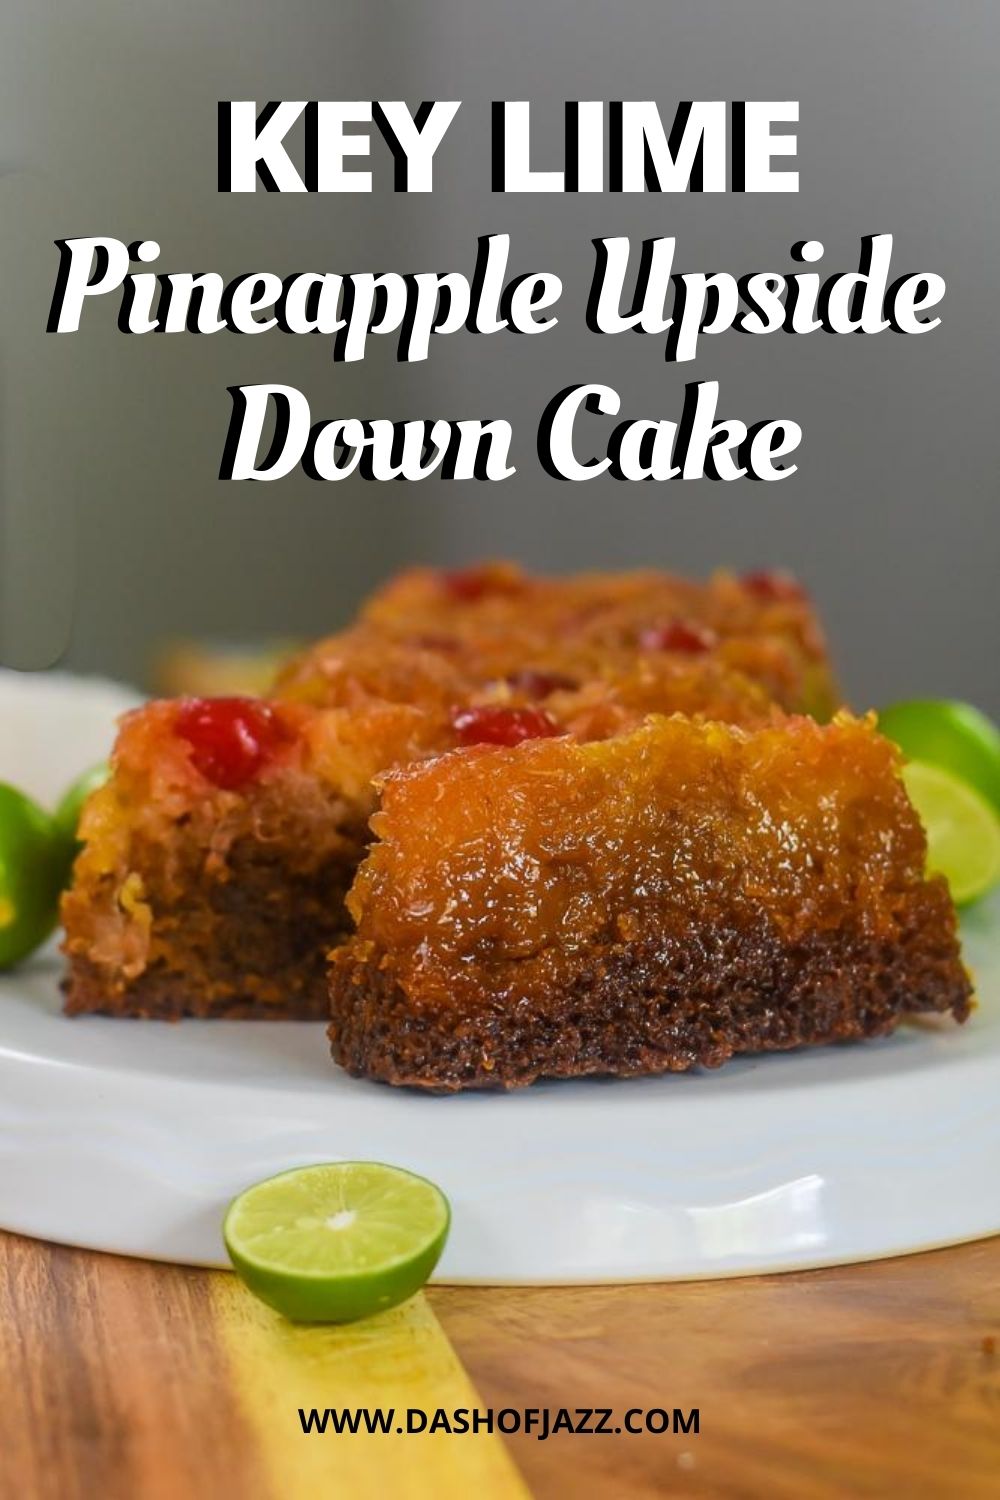 side view of pineapple upside down cake with text overlay "key lime pineapple upside down cake"